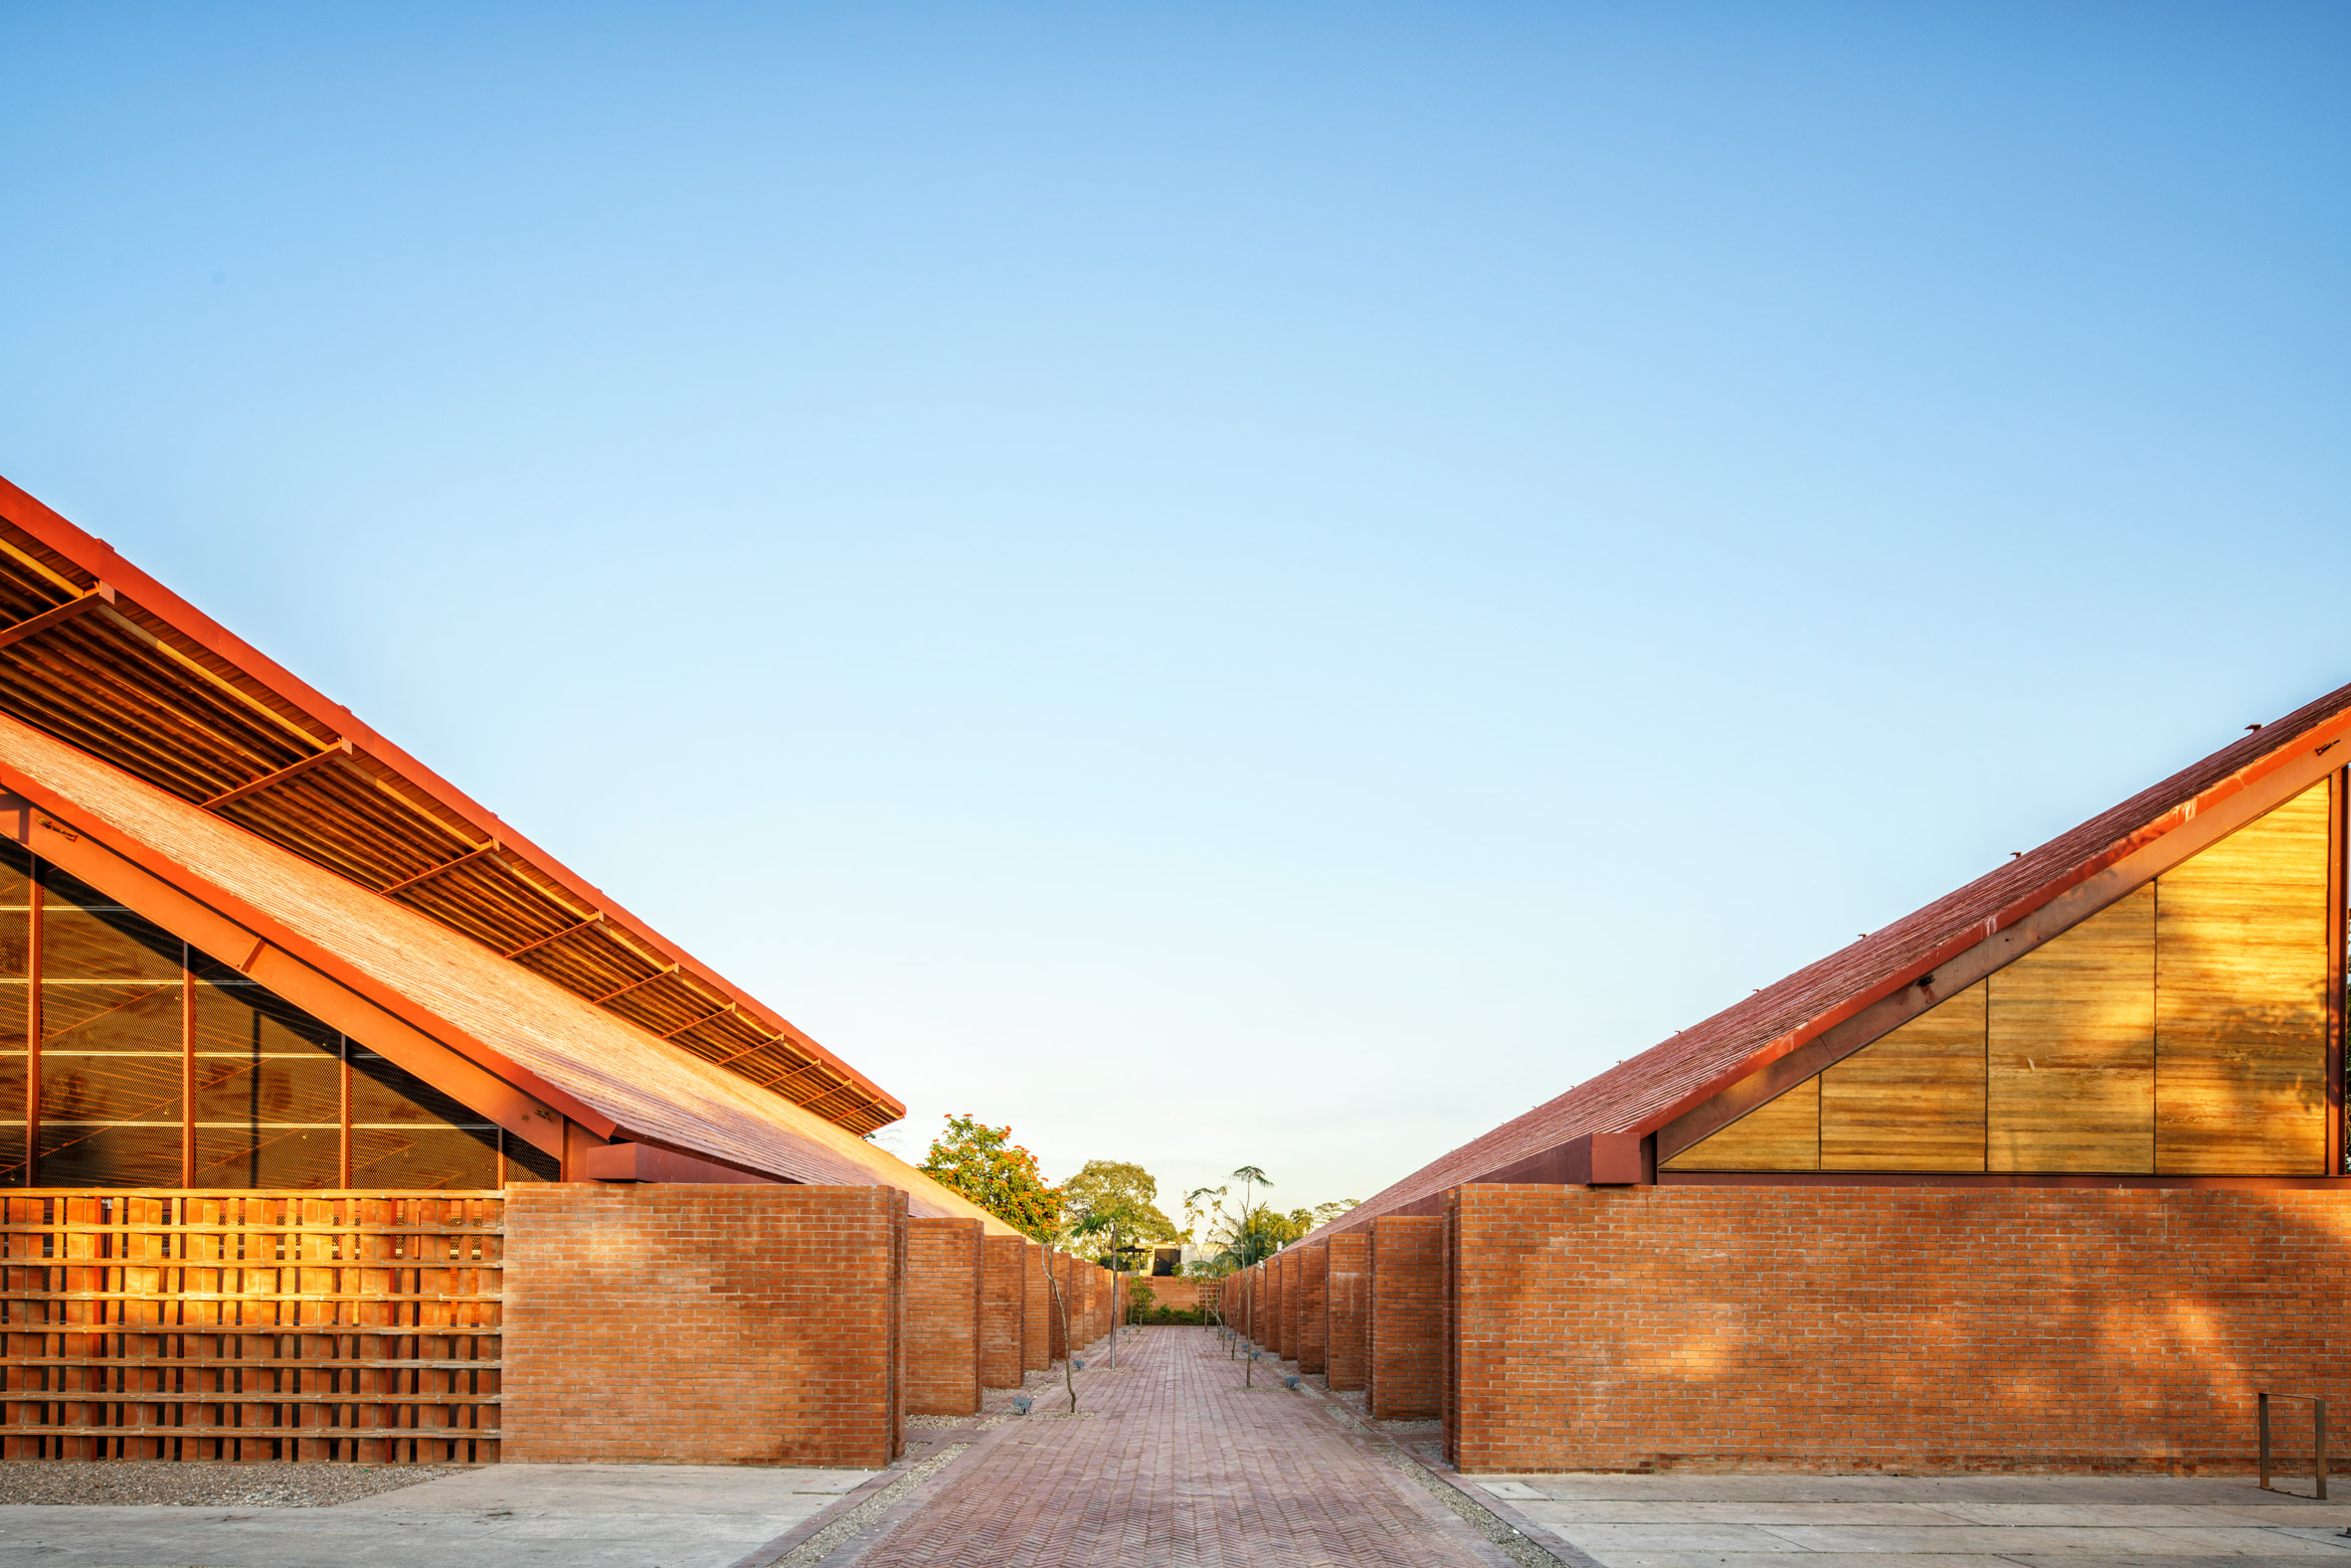 Two external brick walls topped with pitched timber roofs